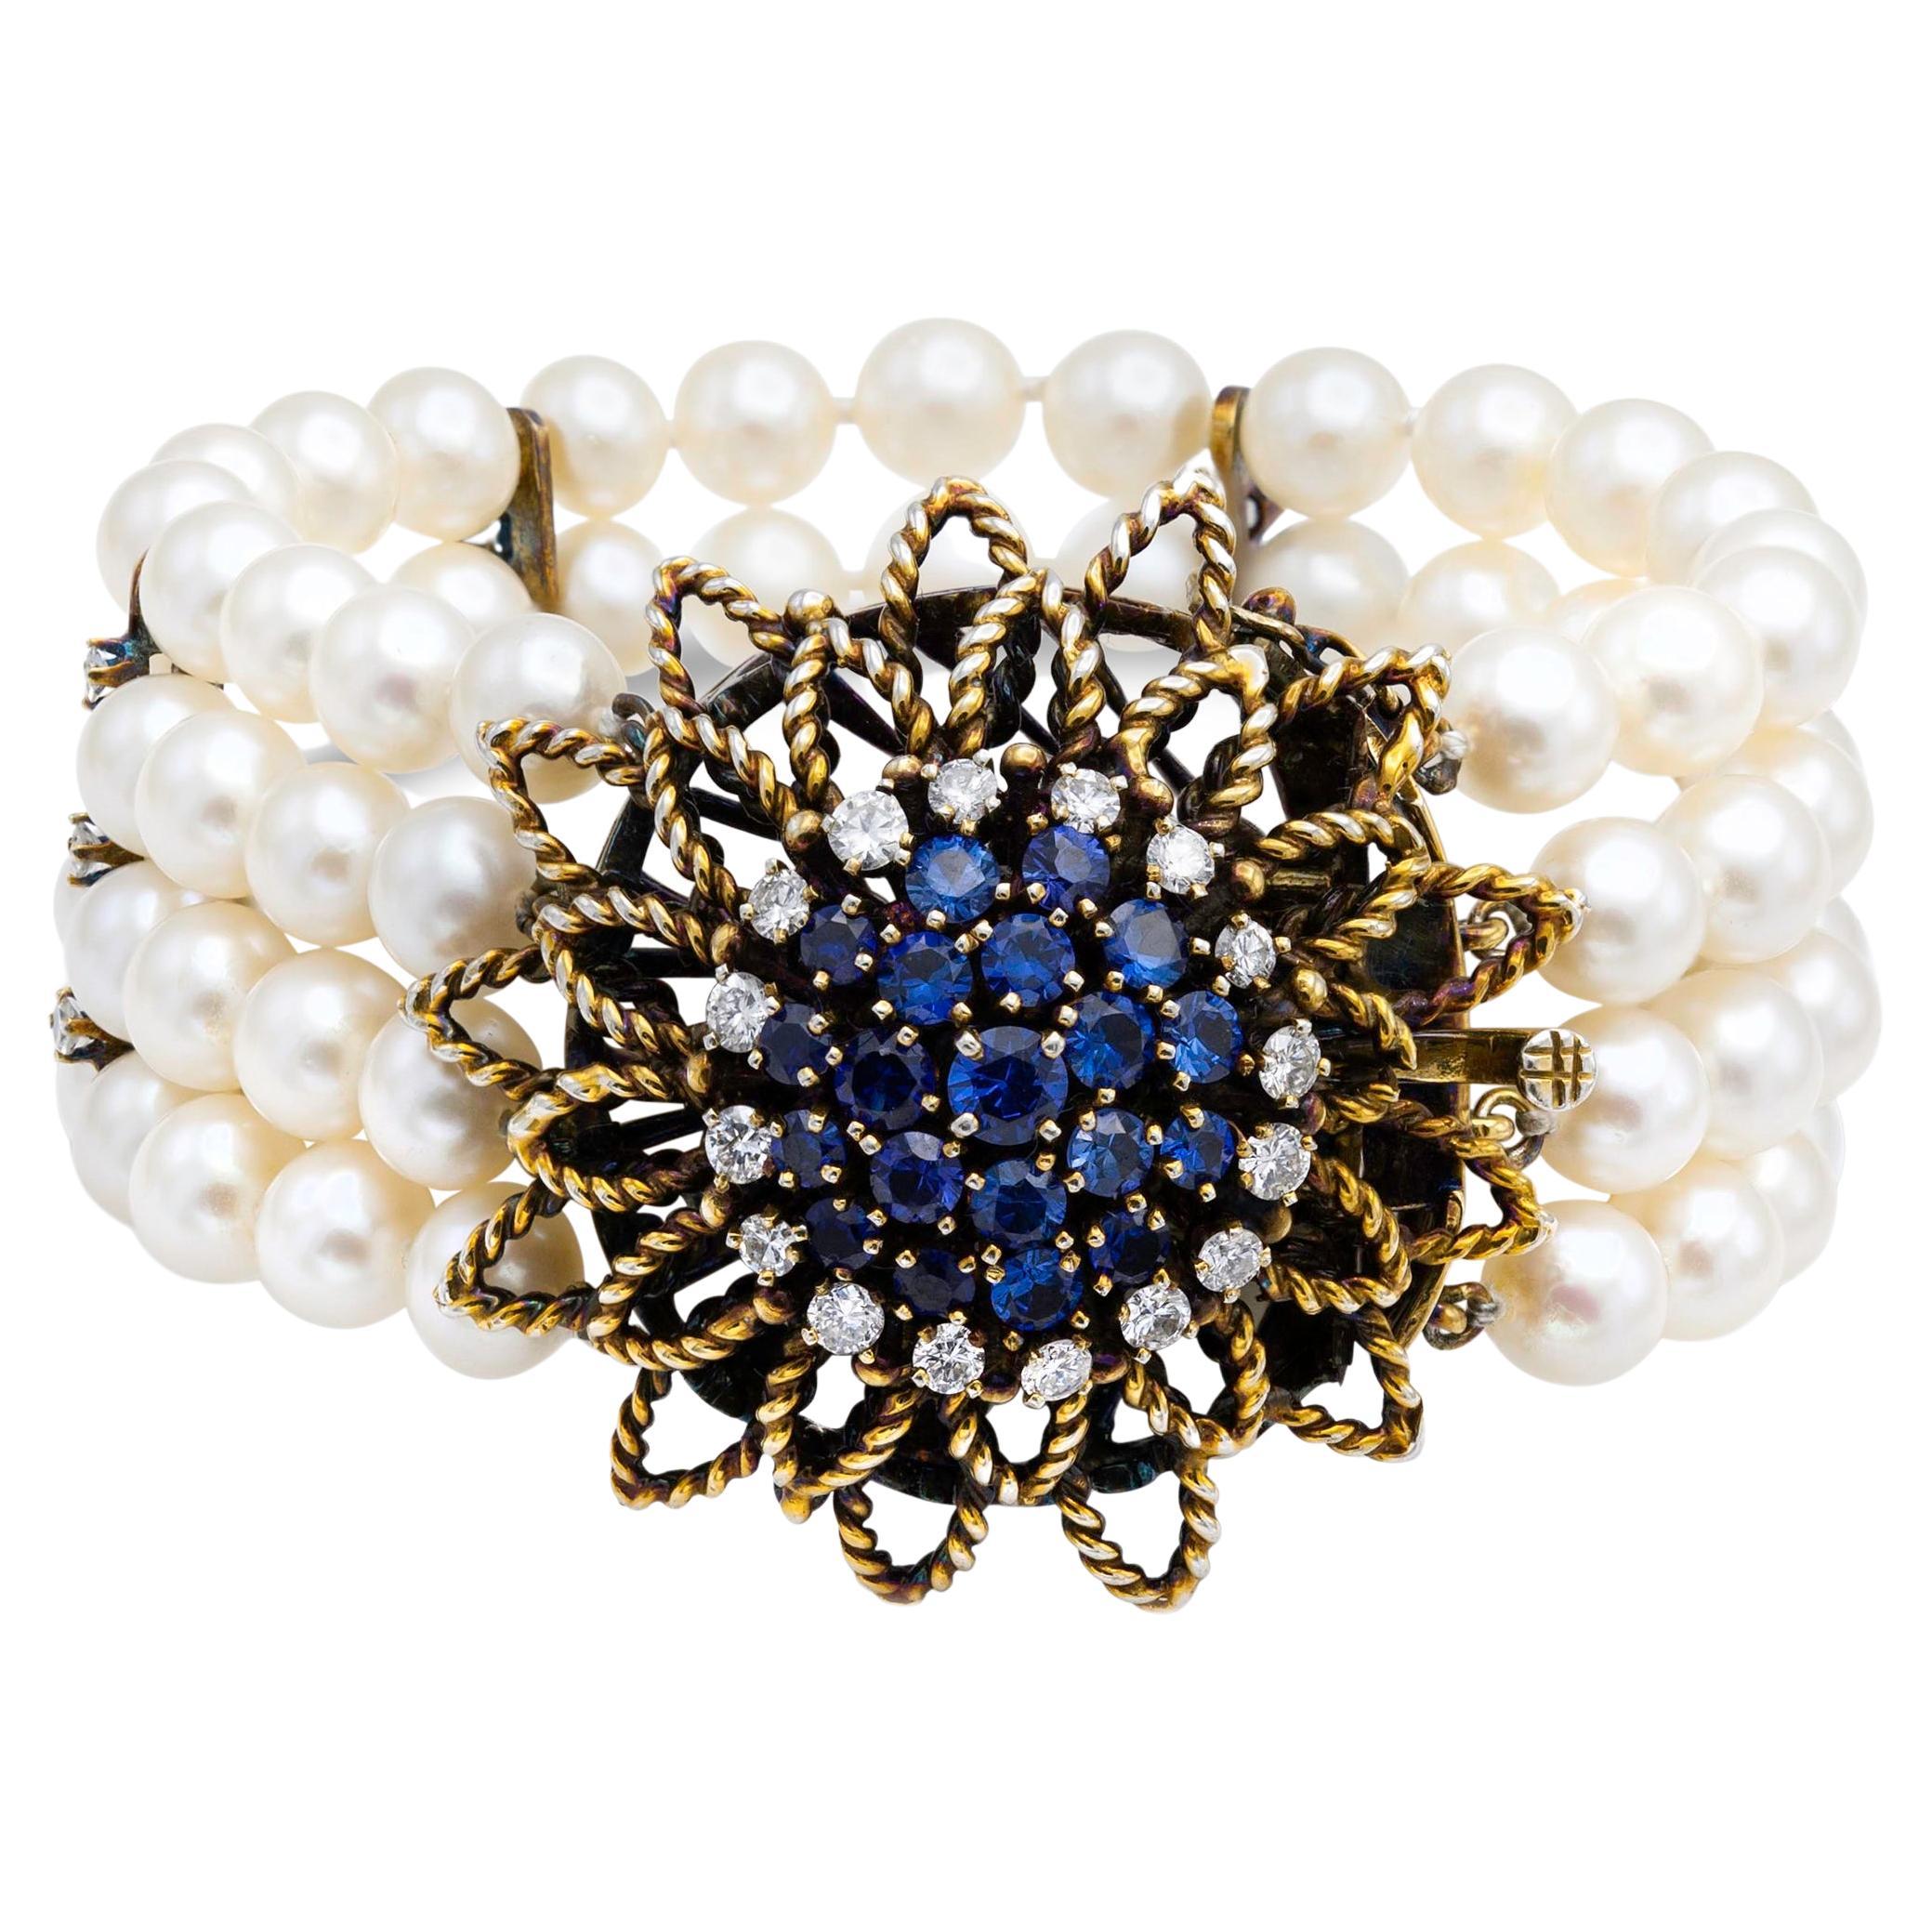 4 Strand Pearl Bracelet with Sapphire Flower Clasp